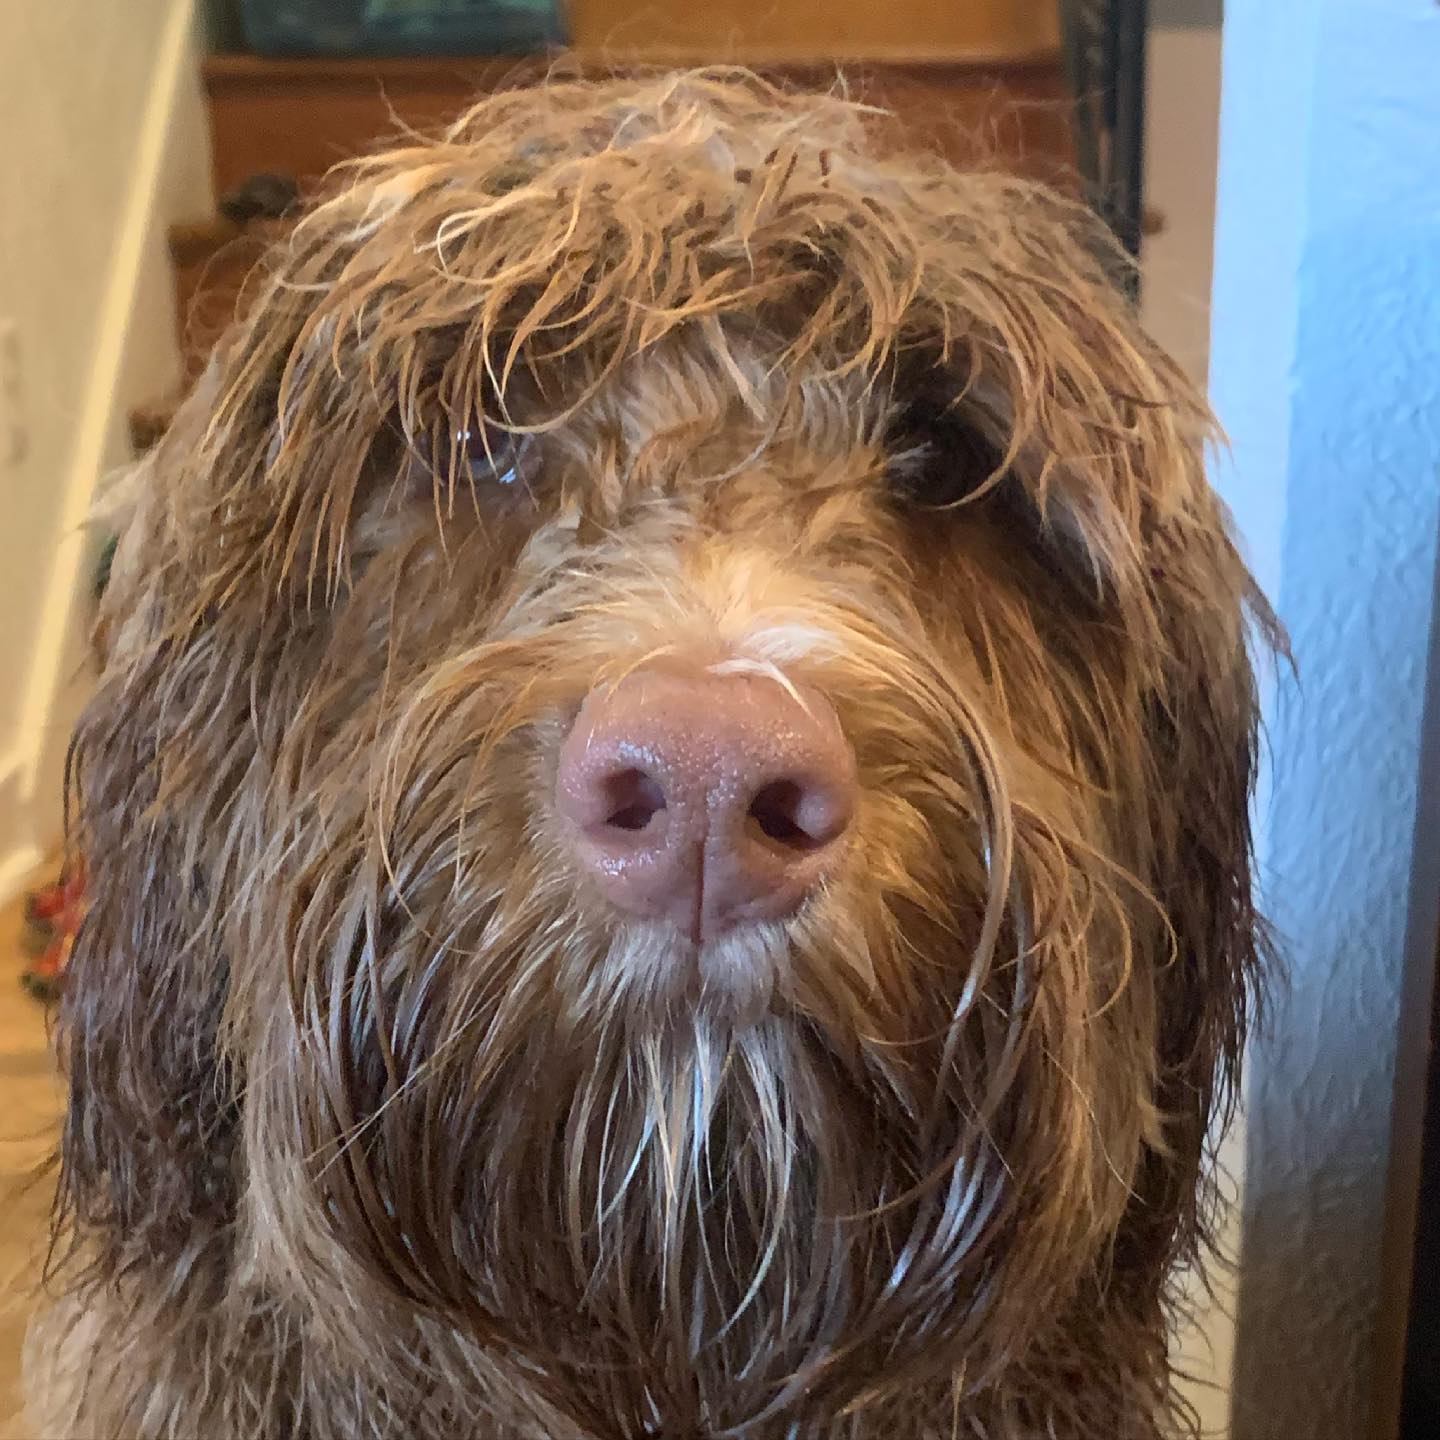 I present @rusty.the.dog.yyj fresh from the salon with a new look. Really, I chose the worst part of the morning for a walk. That was a wet one! #dogwalk #esquimalt #bedraggleddoodle #wetwalk #rustydoodle